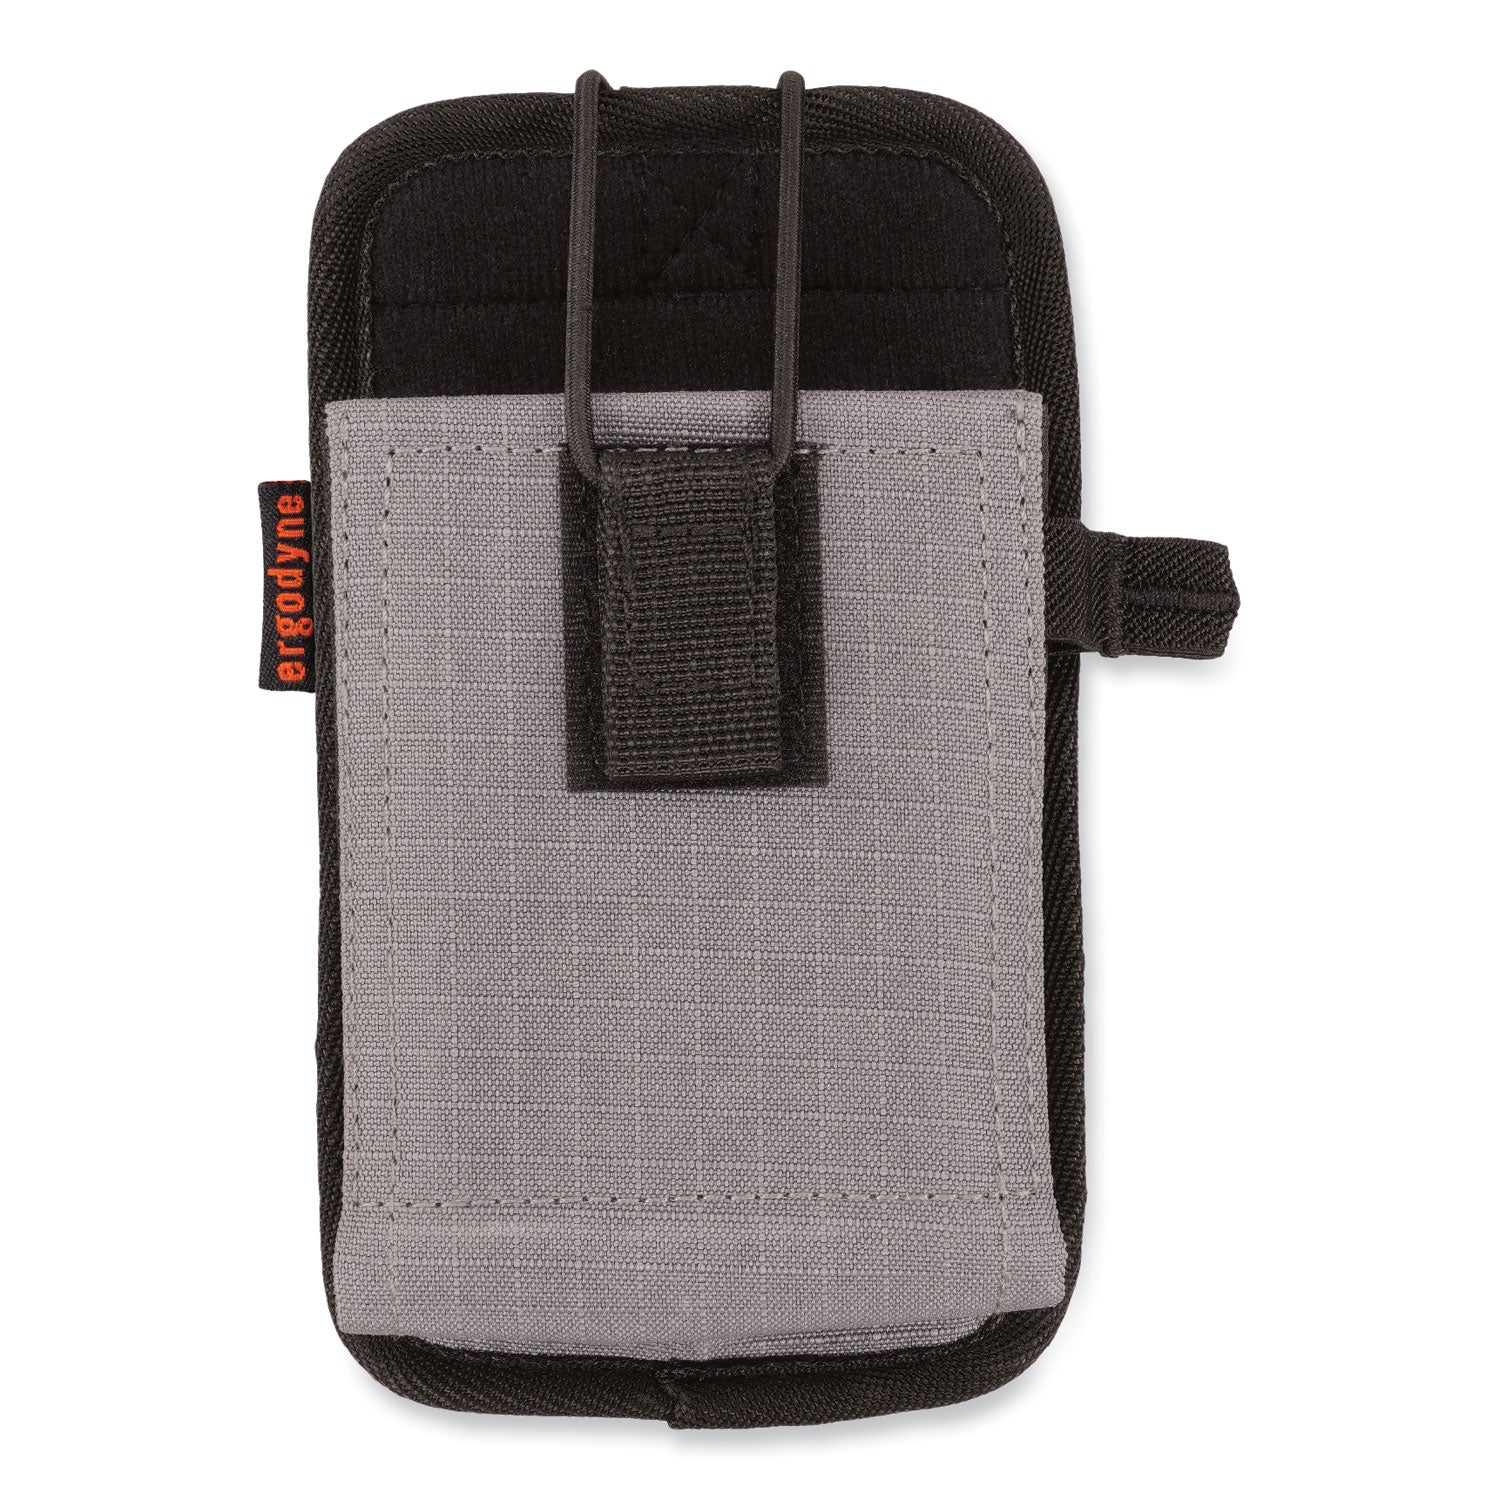 squids-5544-phone-style-scanner-holster-w-belt-clip-and-loops-1-comp-375-x-125-x-65-gray-ships-in-1-3-business-days_ego19187 - 1